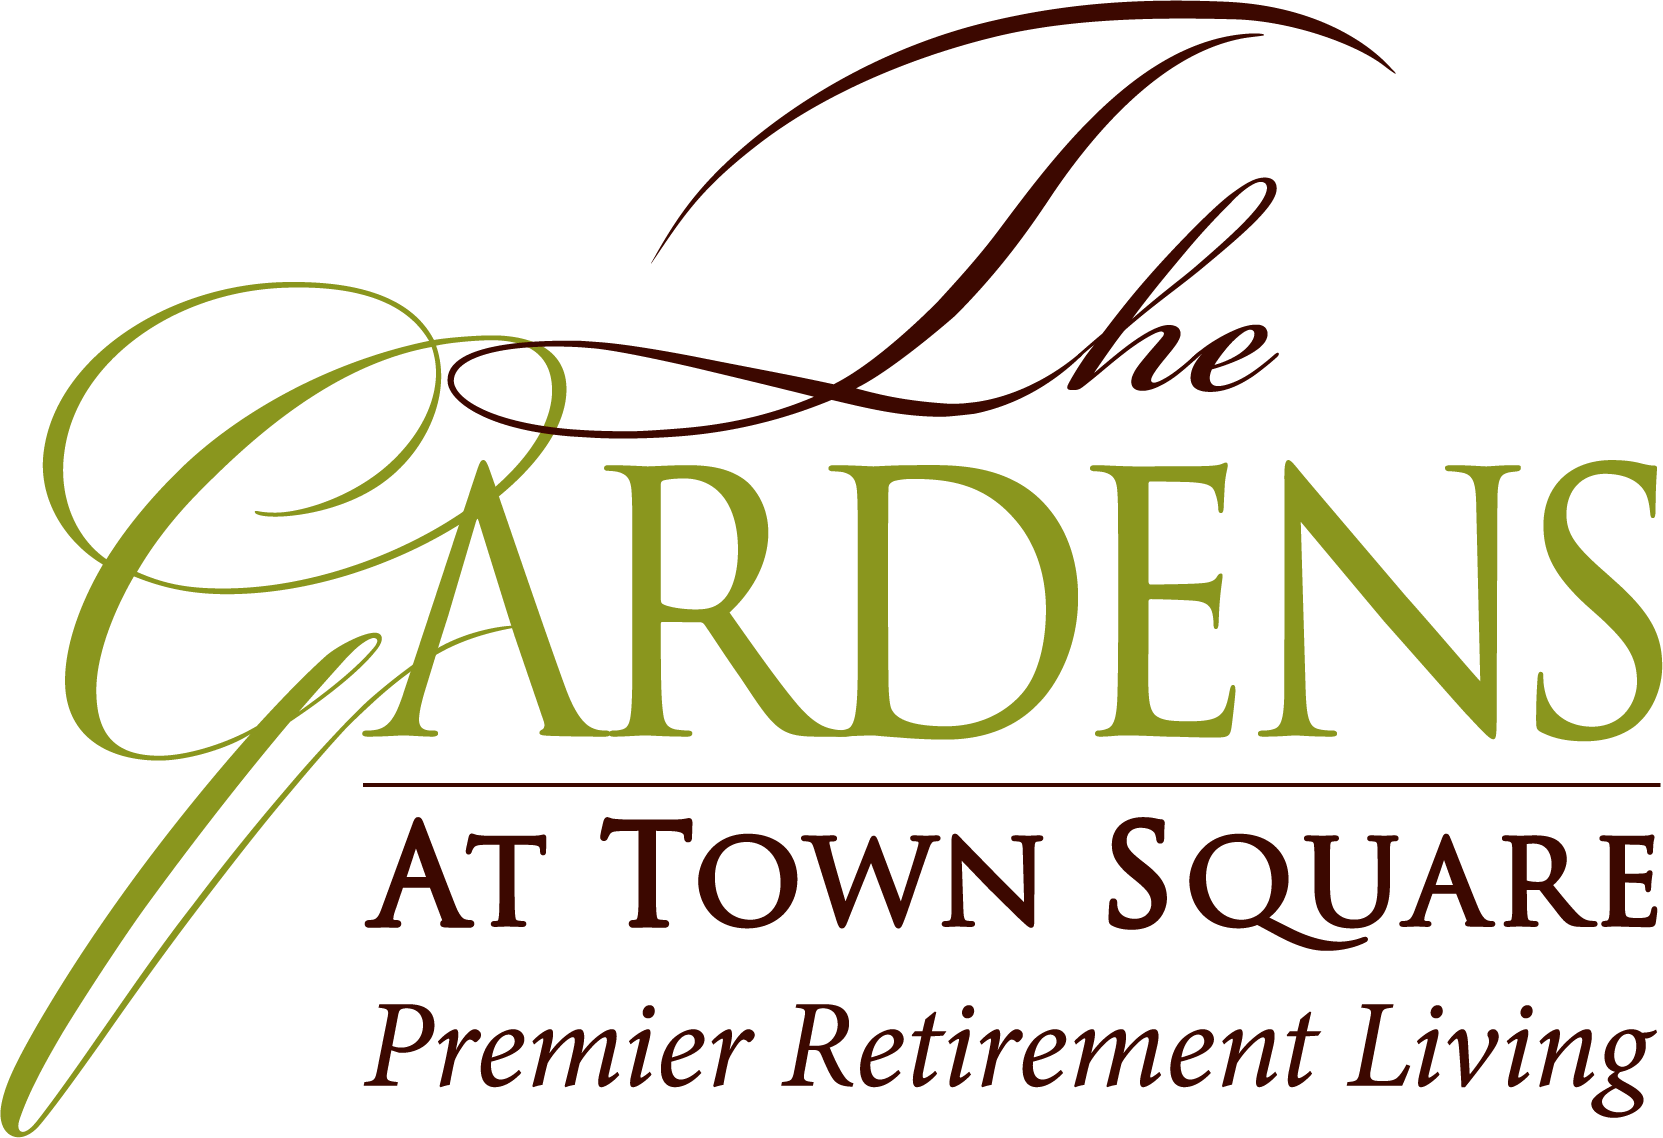 Era Living in Bellevue: The Gardens at Town Square